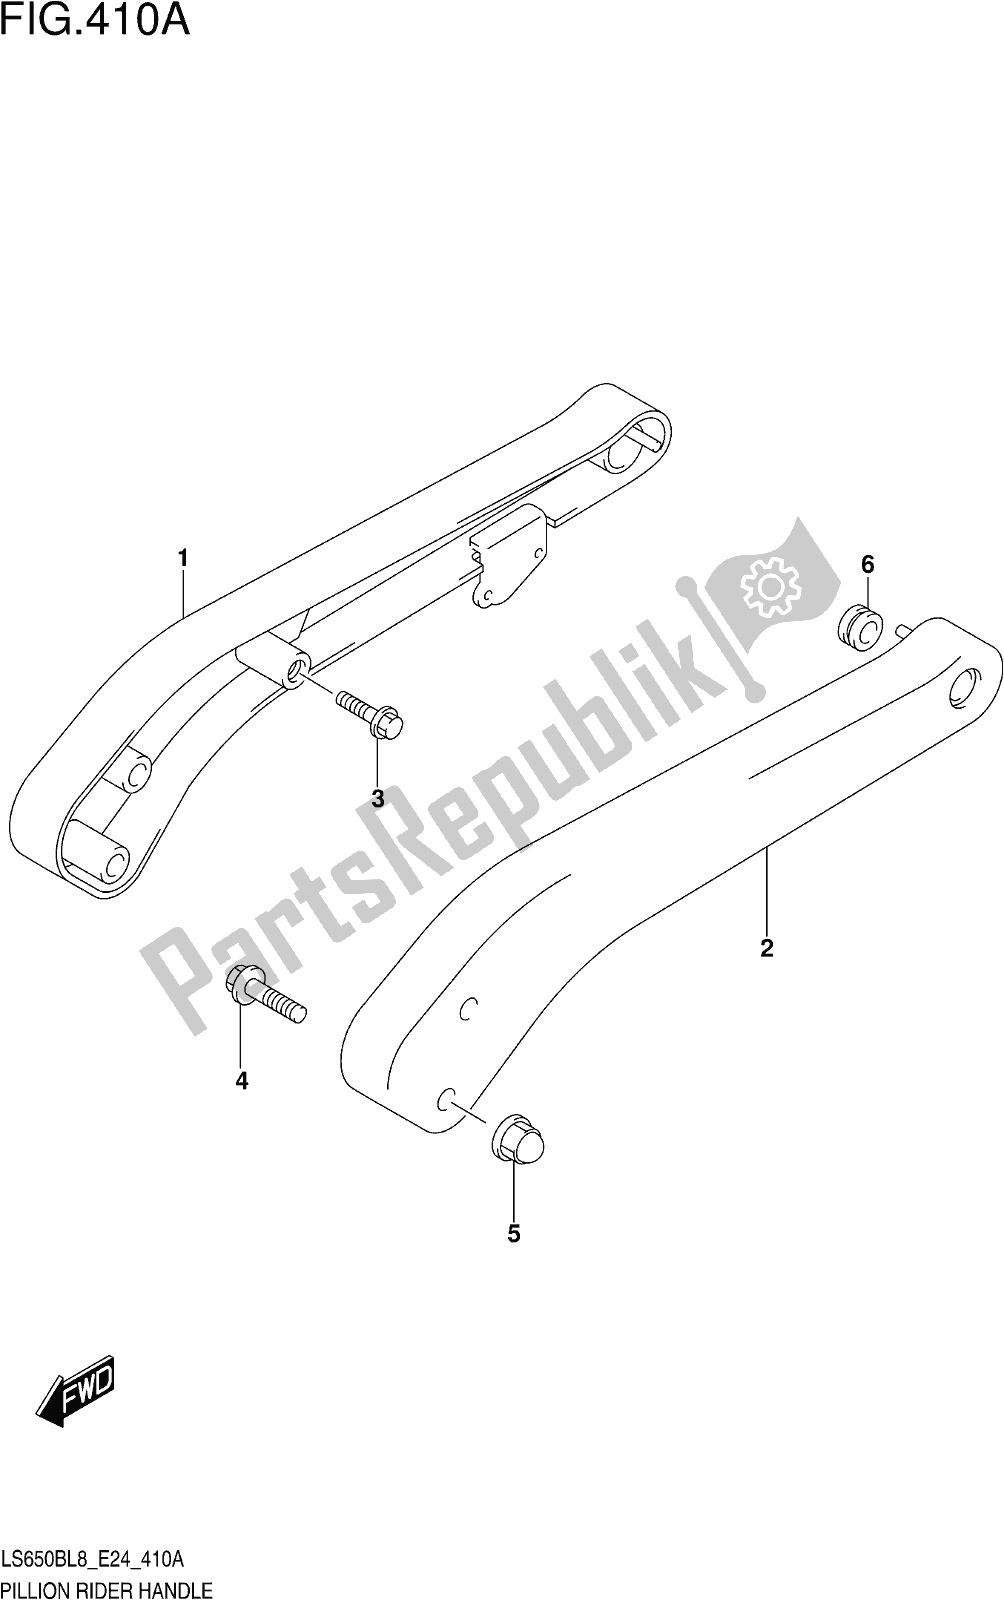 All parts for the Fig. 410a Pillion Rider Handle of the Suzuki LS 650B 2018